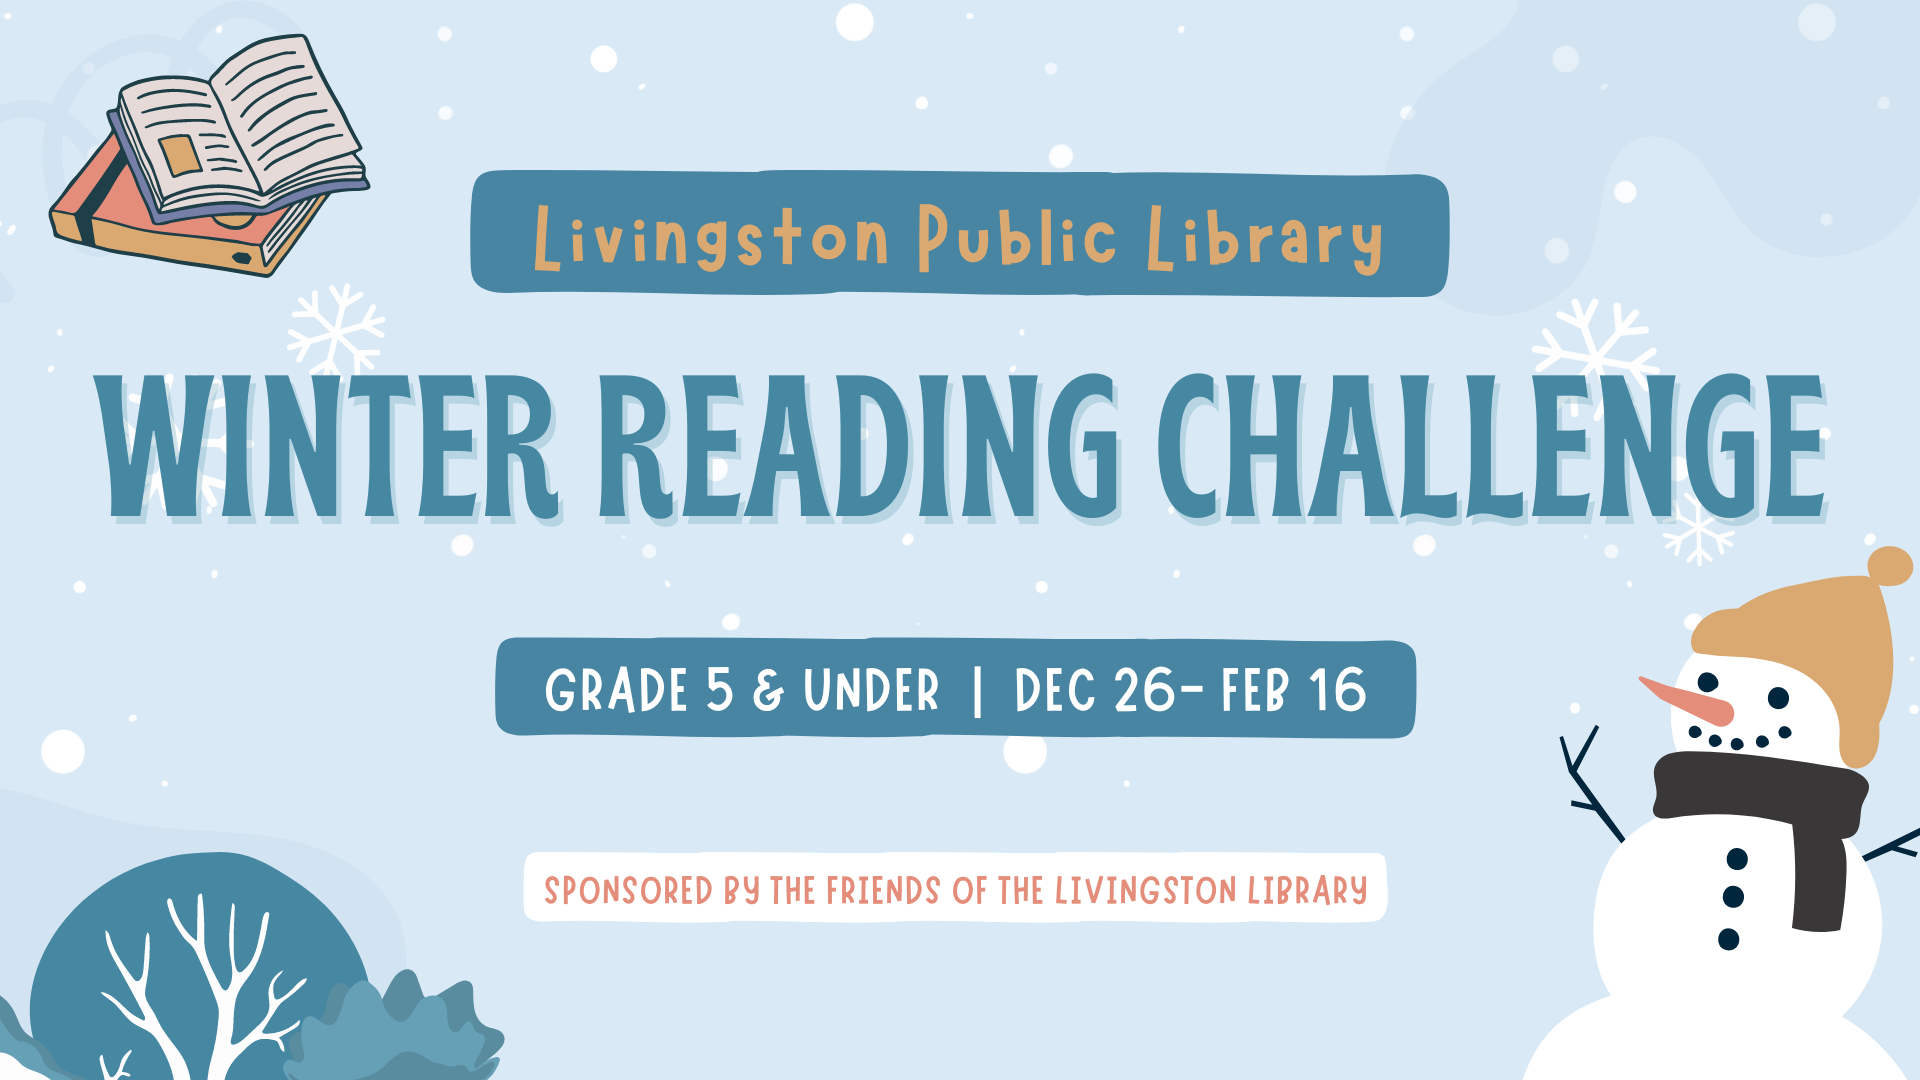 Livingston Public Library Winter Reading Challenge, grades 5 and under, December 26 to February 16 sponsored by the Friends of the Livingston Library with images of an open book, a snowman, and snowflakes.